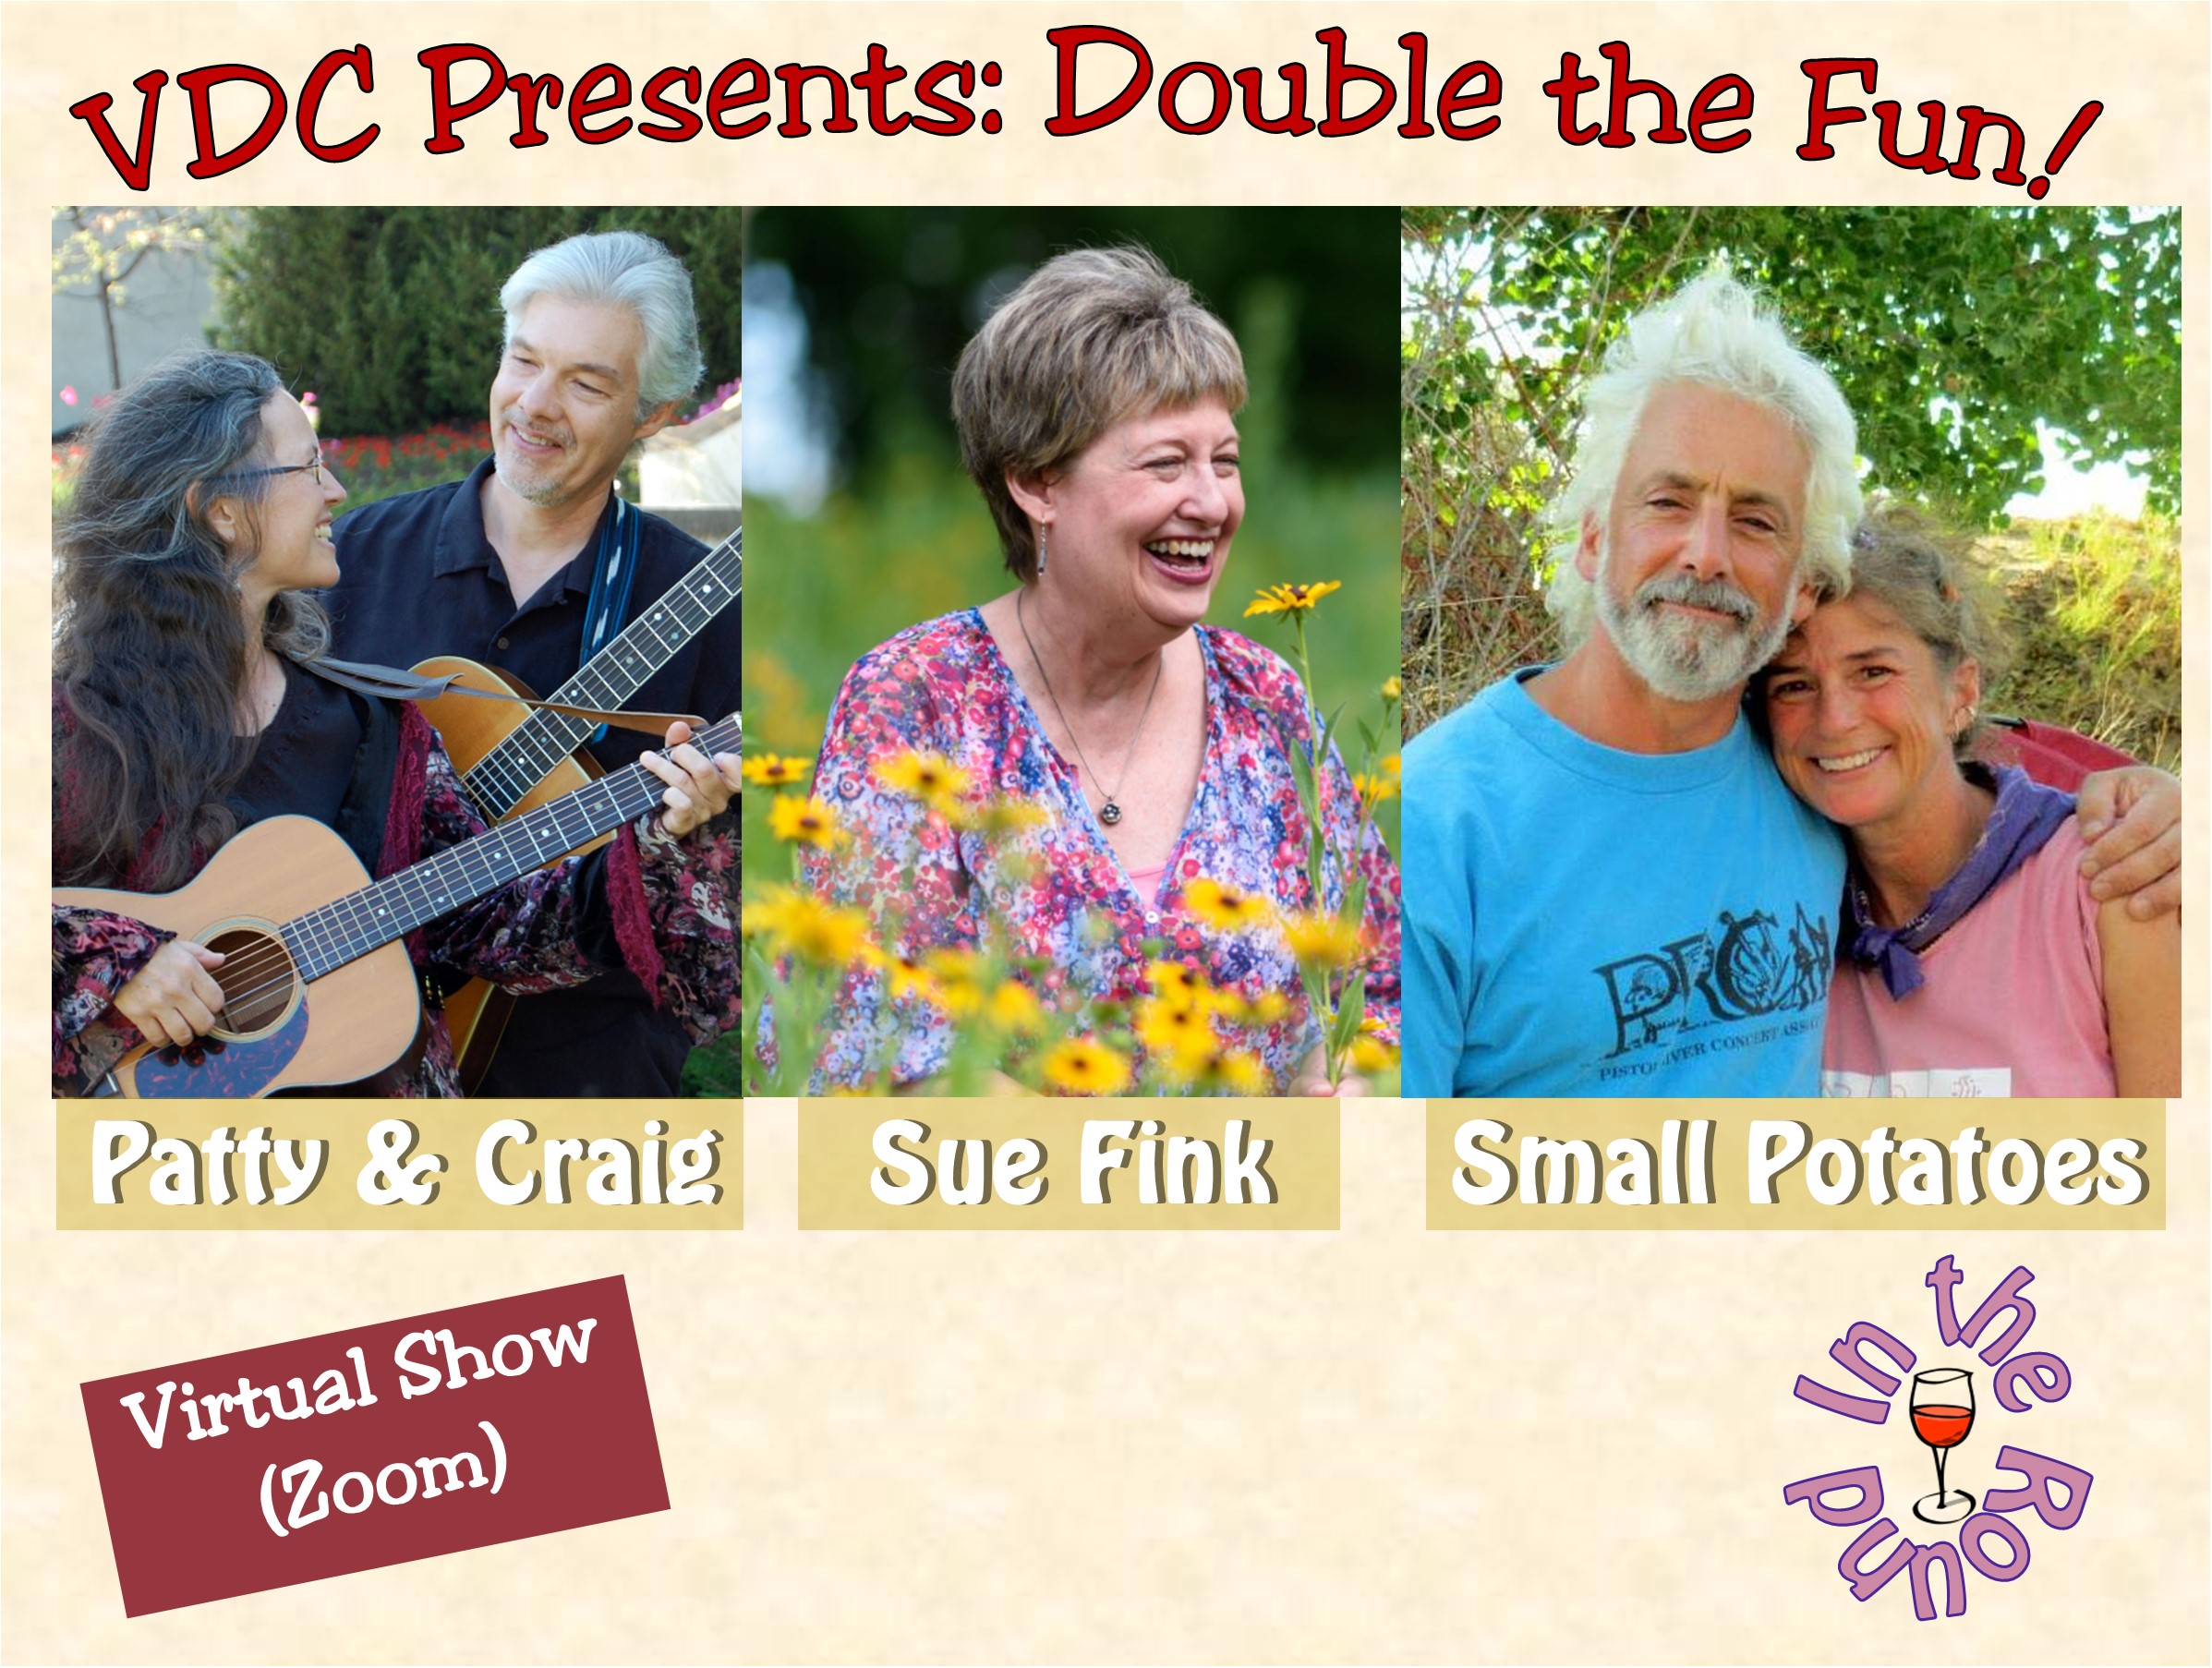 Virtual Dream Café Presents: 
Double the Fun:  Patty & Craig, Small Potatoes, and Sue Fink In-the-Round